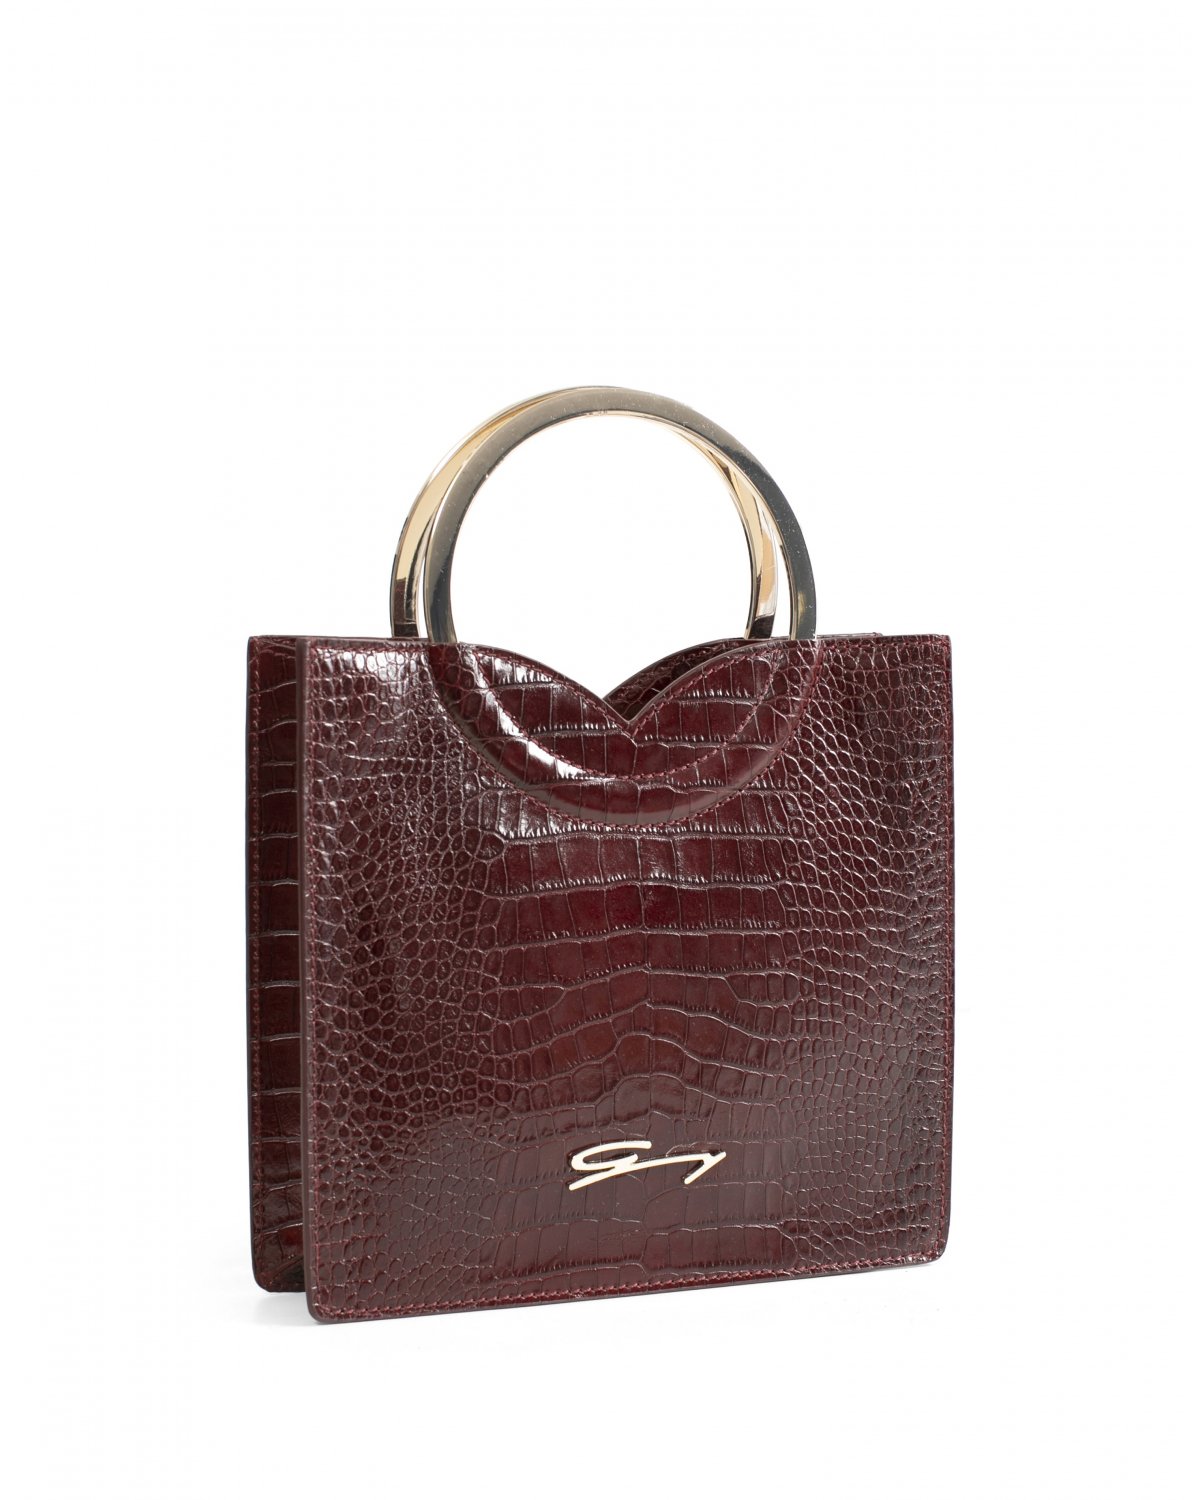 Small burgundy leather bag with round metal handles | Accessories, -40% | Genny